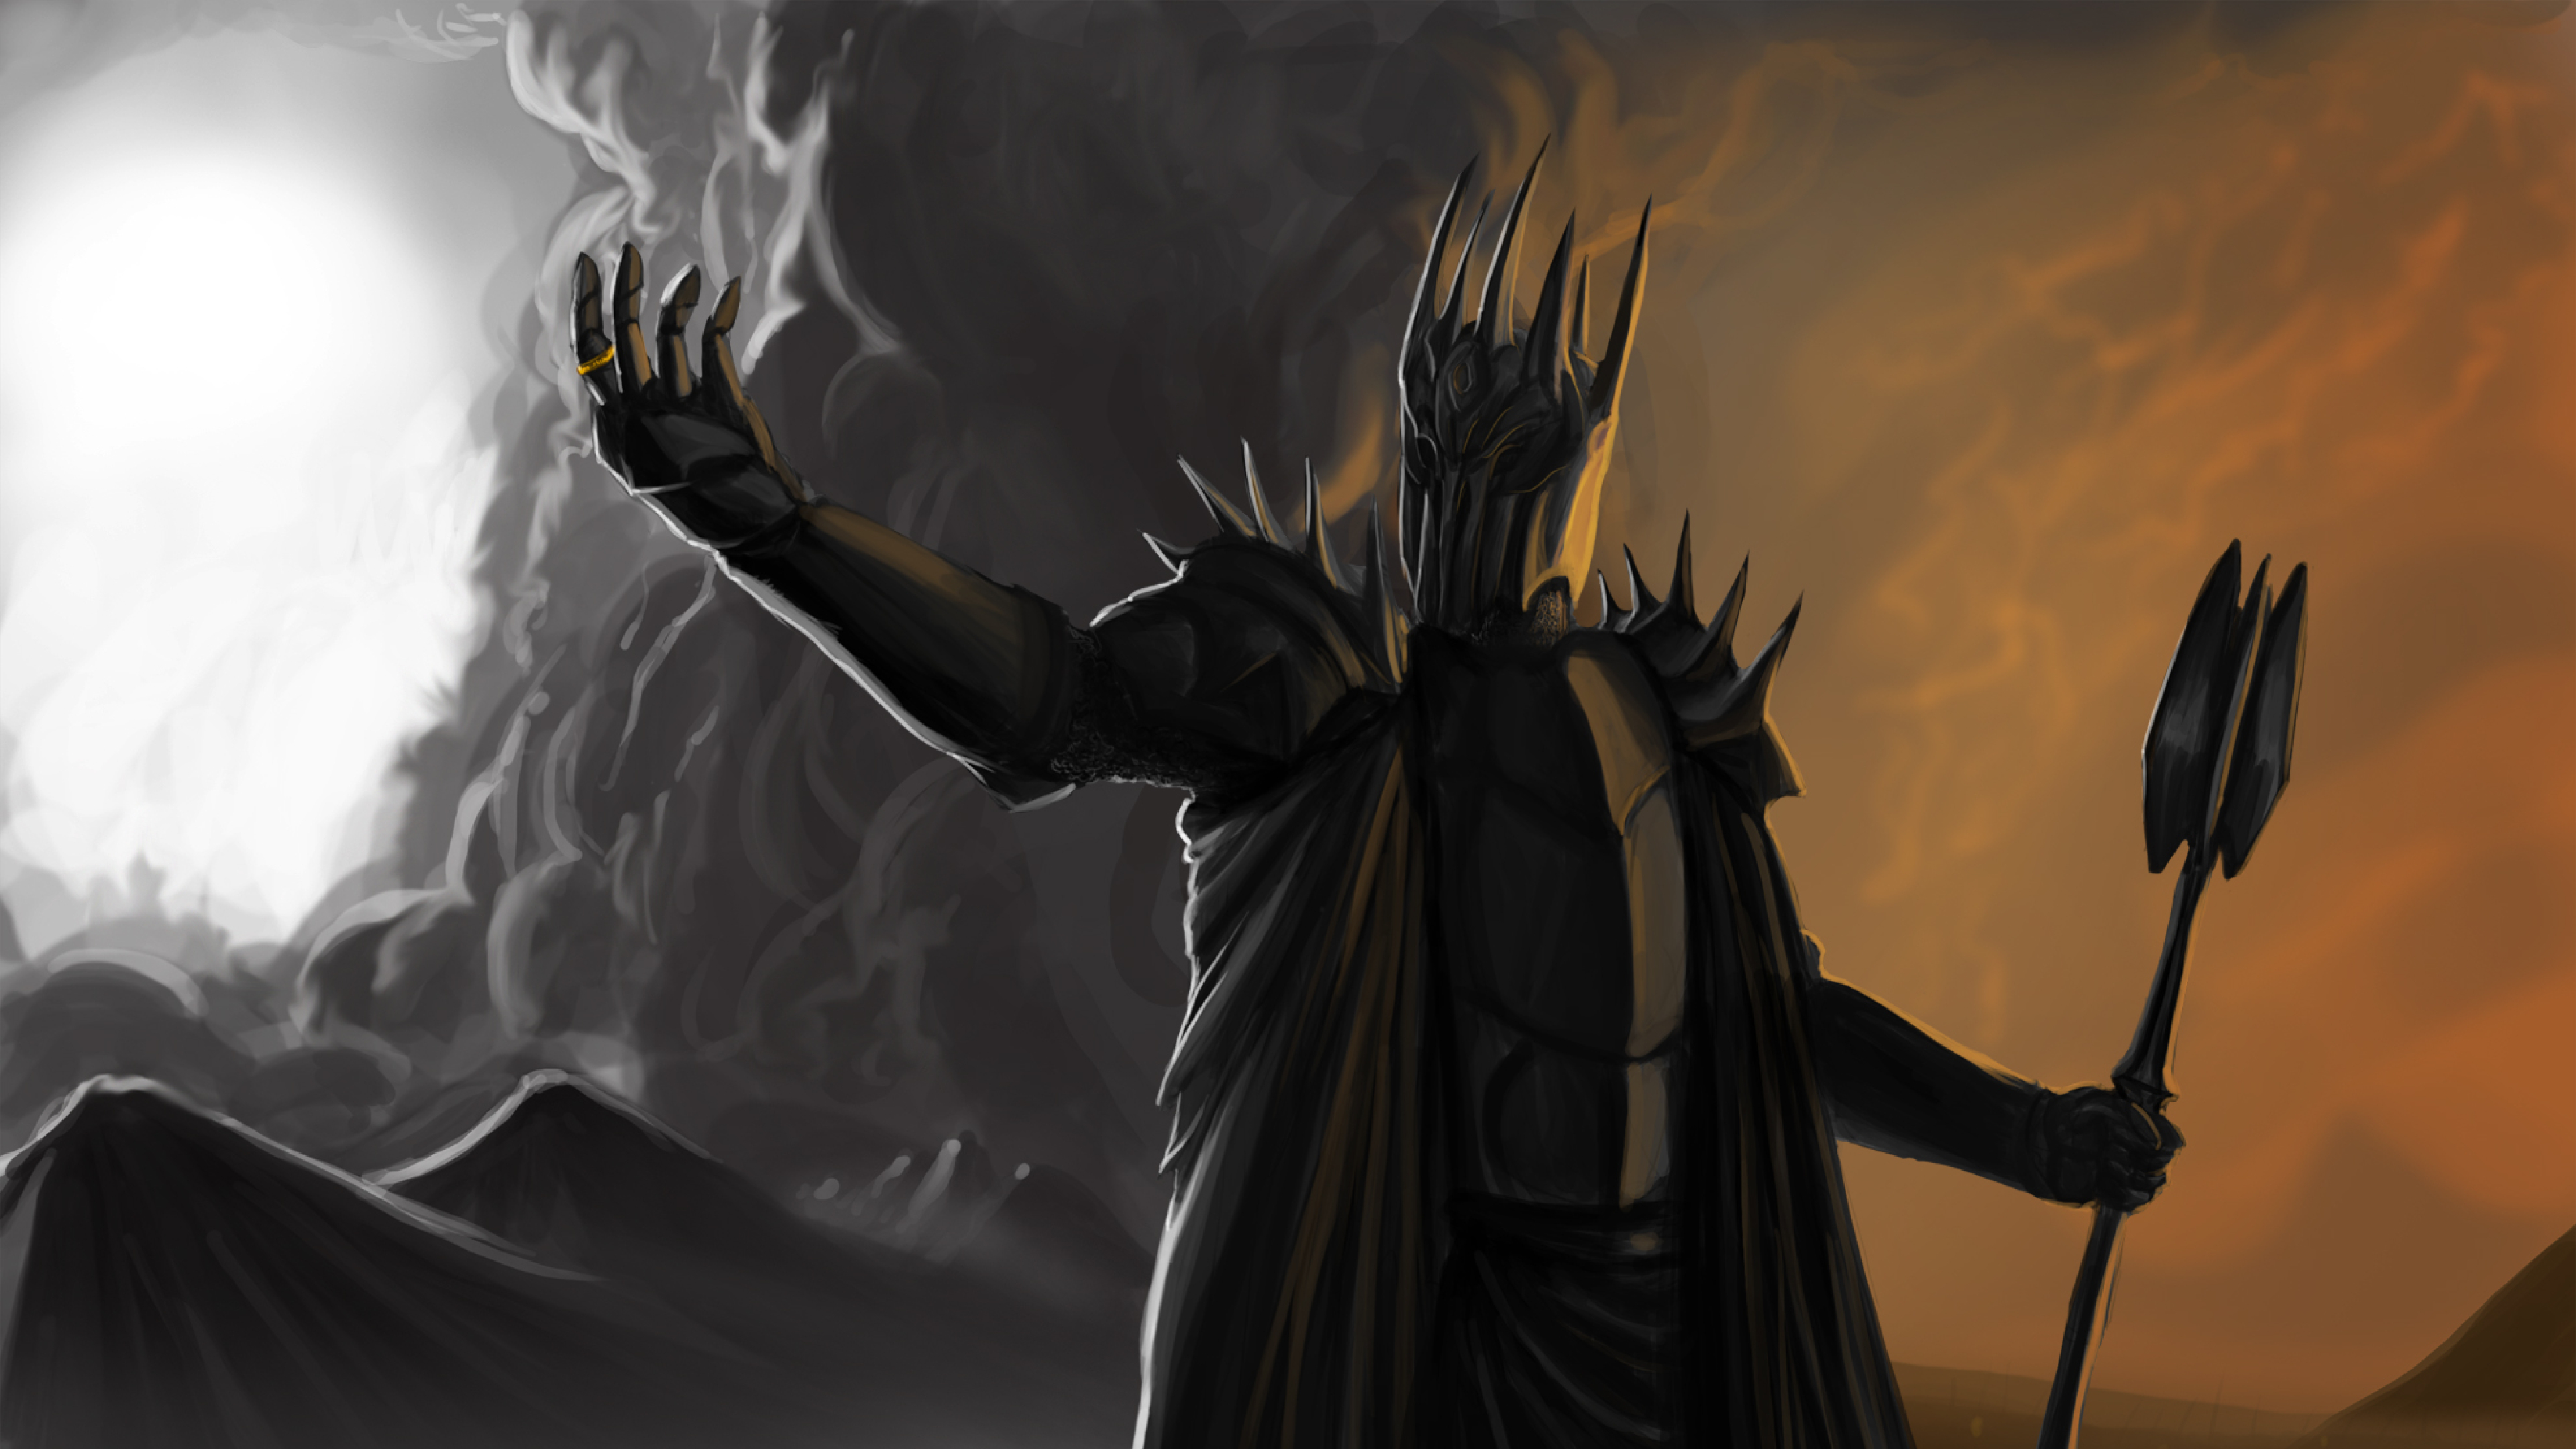 3840x2160 Sauron Lord Of The Rings 4k Wallpaper Hd Fantasy